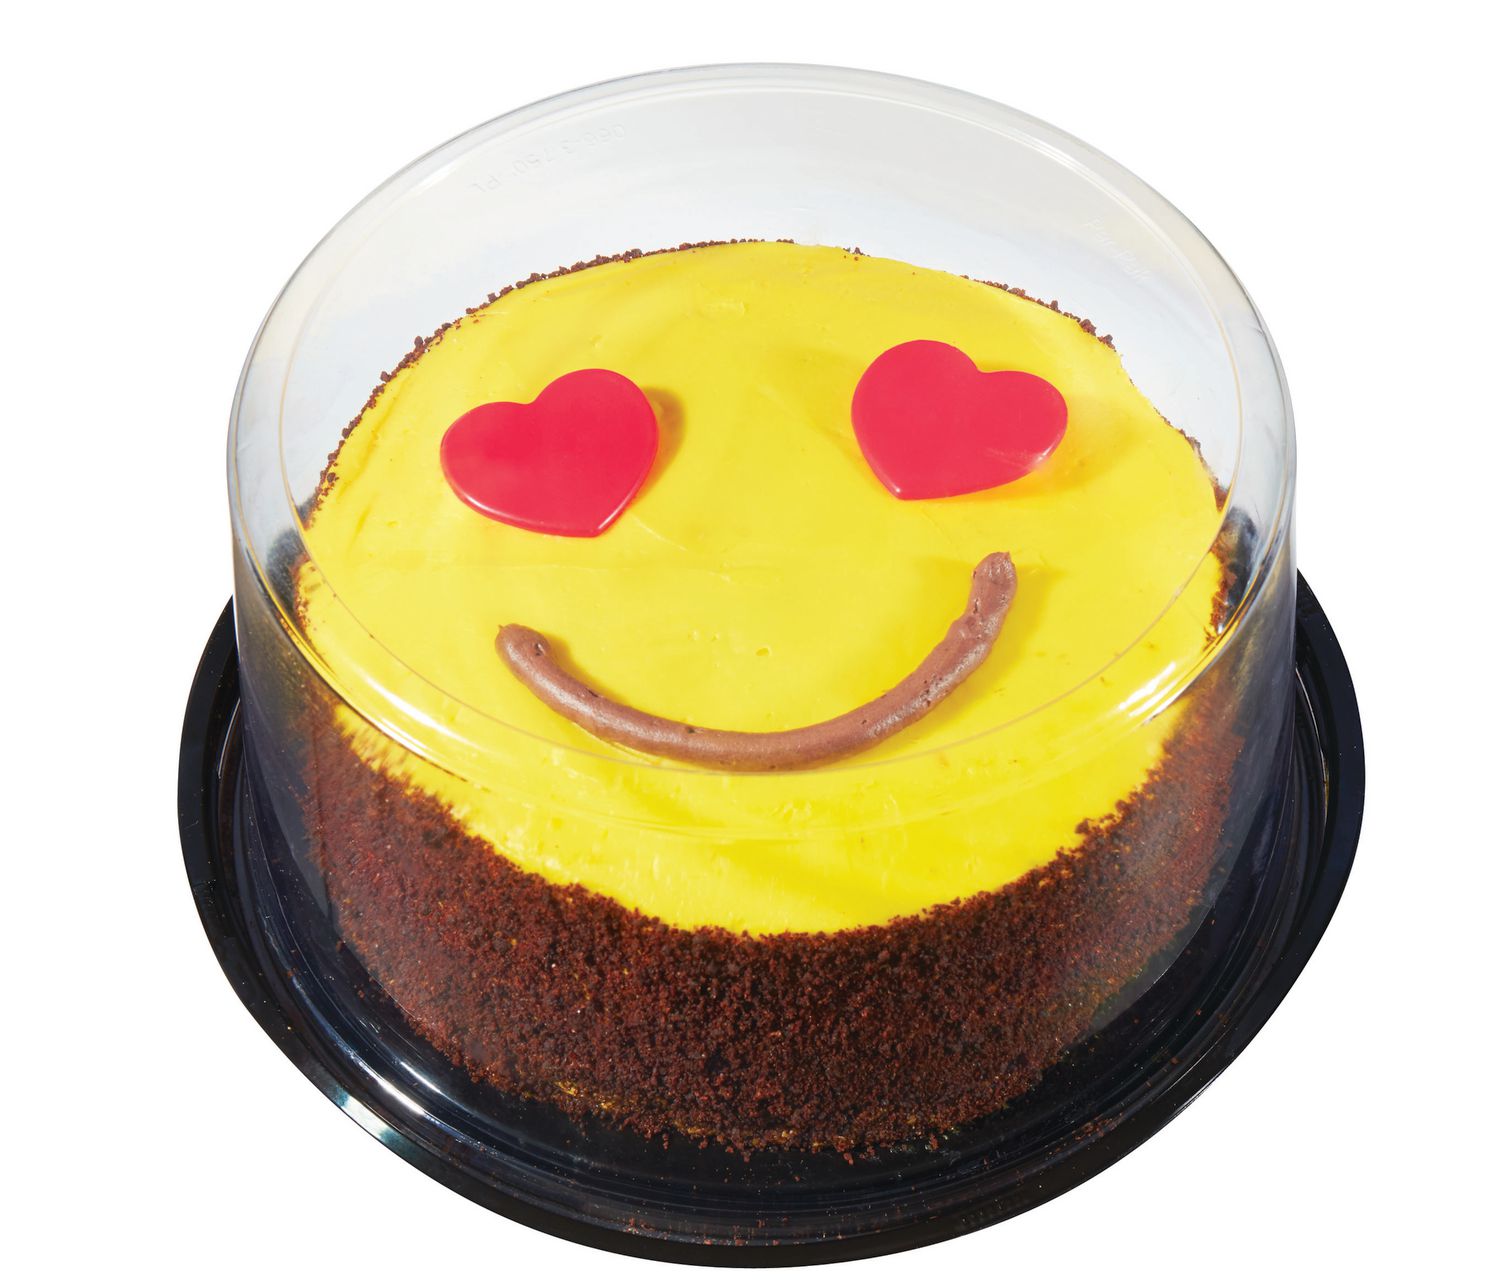 Premium Photo | A chocolate cake with a smiley face on it.